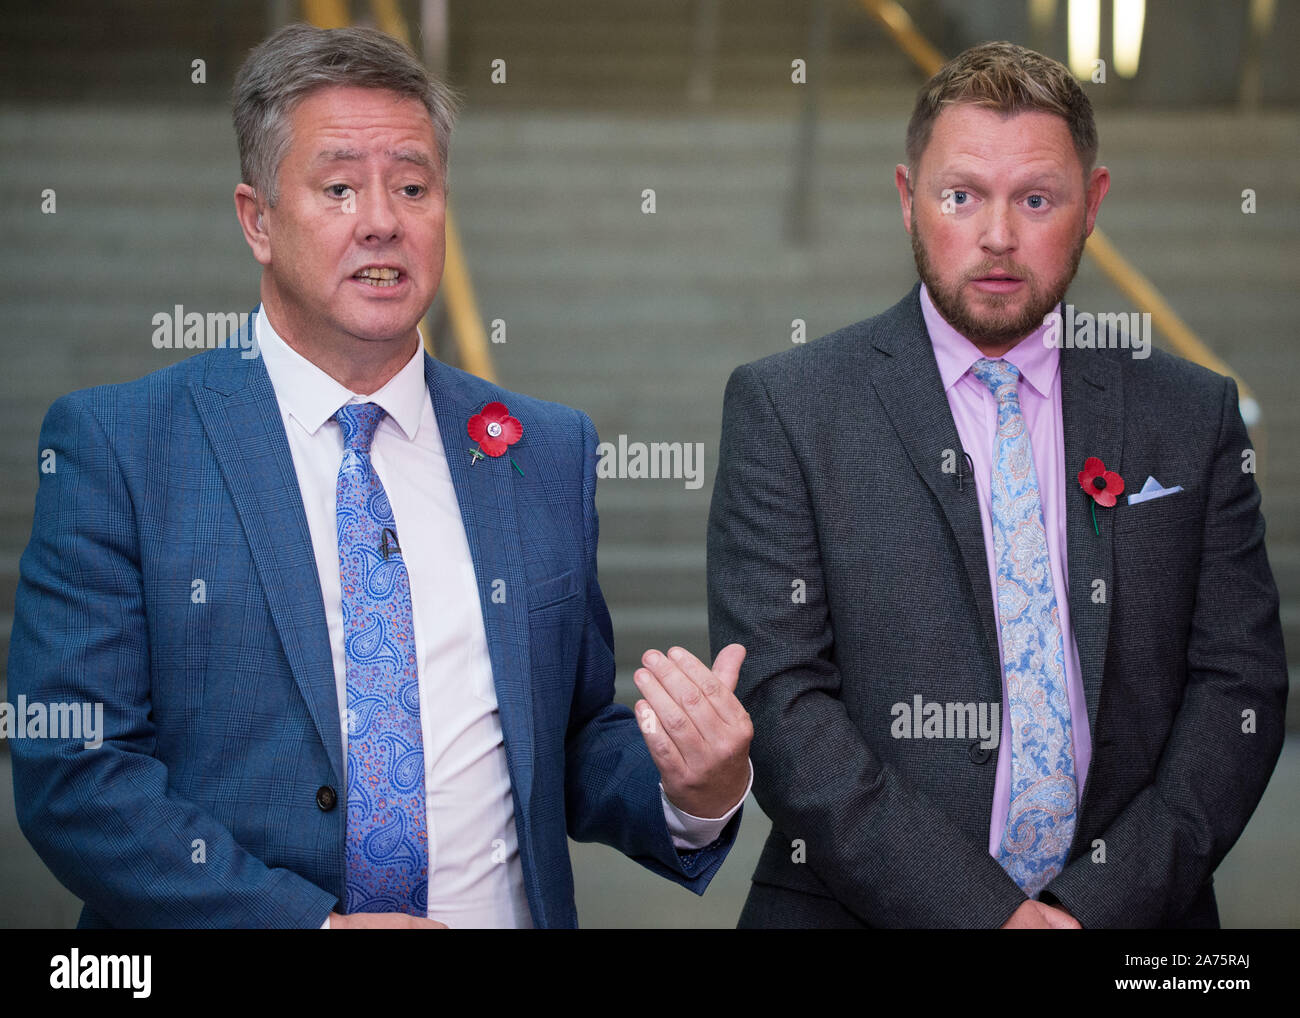 Edinburgh, 30 October 2019. Pictured: (left-right) Keith Brown MSP - Depute Leader of the Scottish National Party (SNP);, Jamie Green MSP - Shadow Cabinet Secretary for Transport, Infrastructure and Connectivity. Scenes from inside the Scottish Parliament in Edinburgh.  Credit: Colin D Fisher/CDFIMAGES.COM Stock Photo